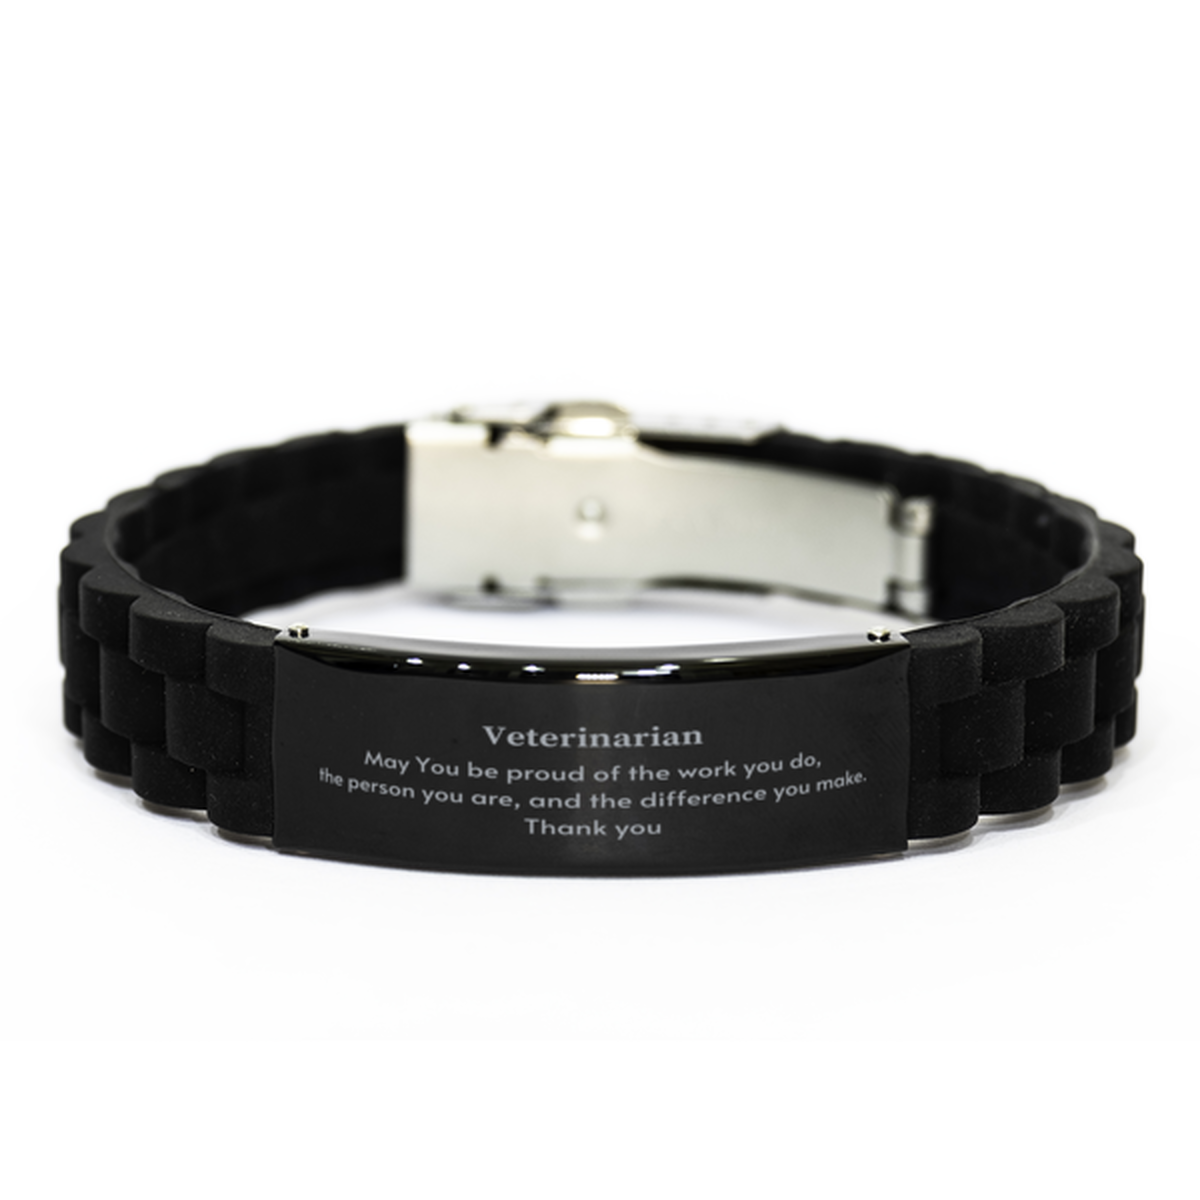 Heartwarming Black Glidelock Clasp Bracelet Retirement Coworkers Gifts for Veterinarian, Veterinarian May You be proud of the work you do, the person you are Gifts for Boss Men Women Friends